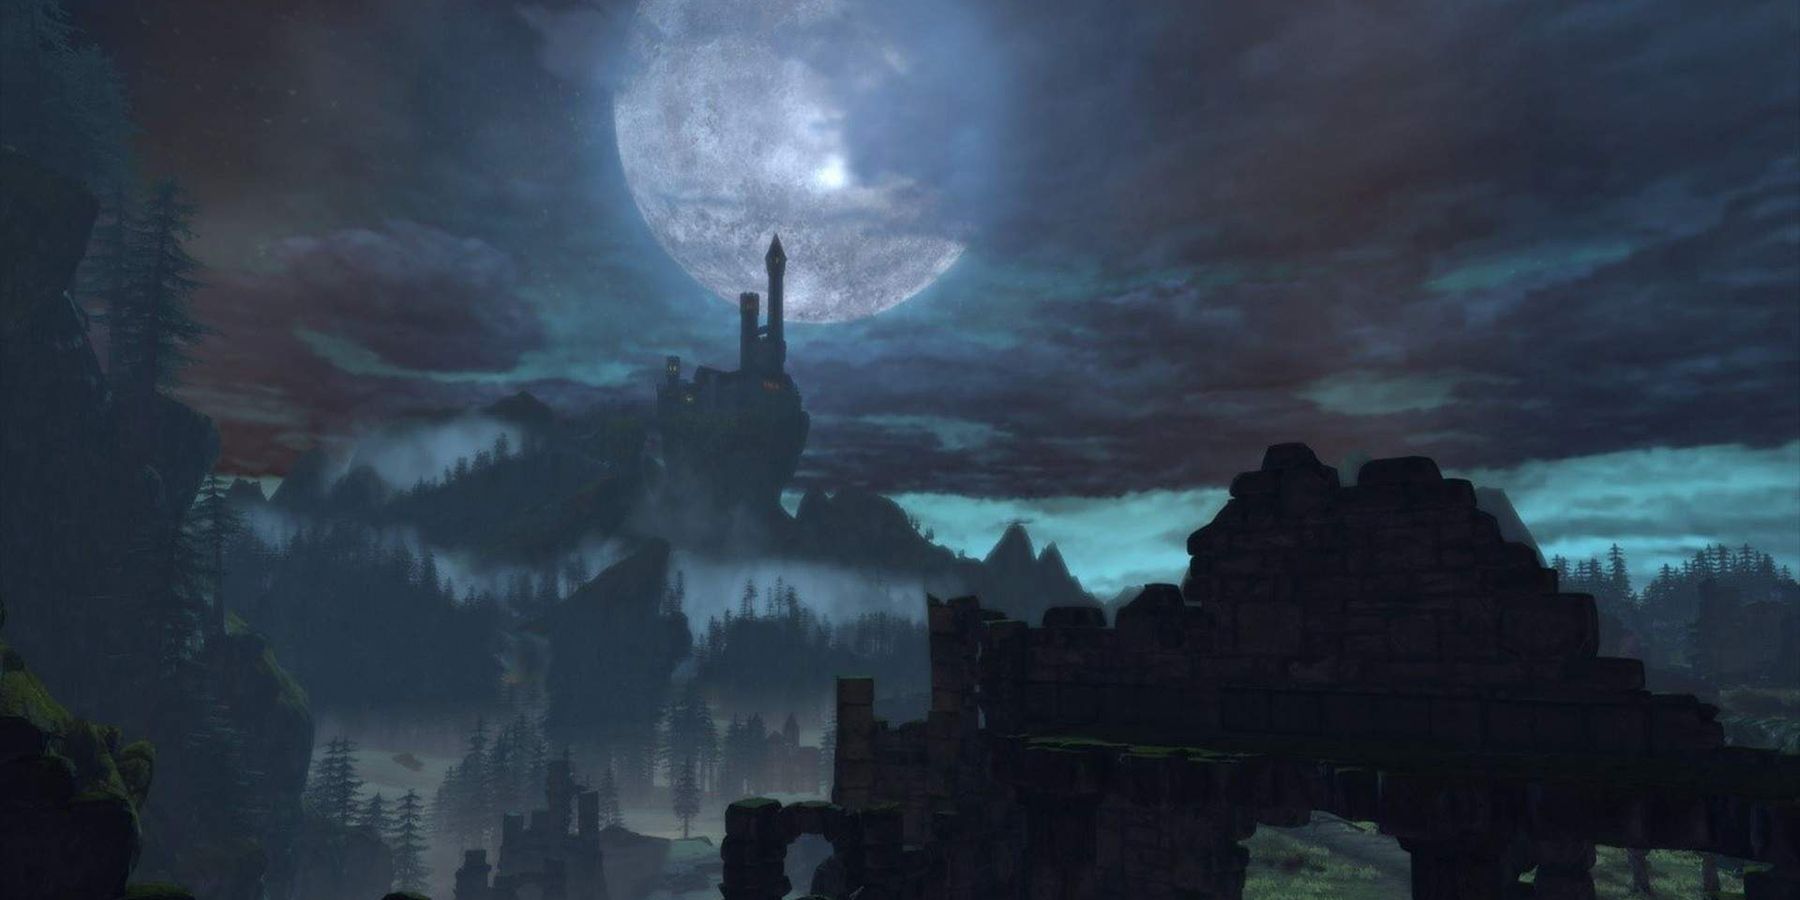 Neverwinter Castle Ravenloft and Other Creepy DnD Locations To Visit This Halloween